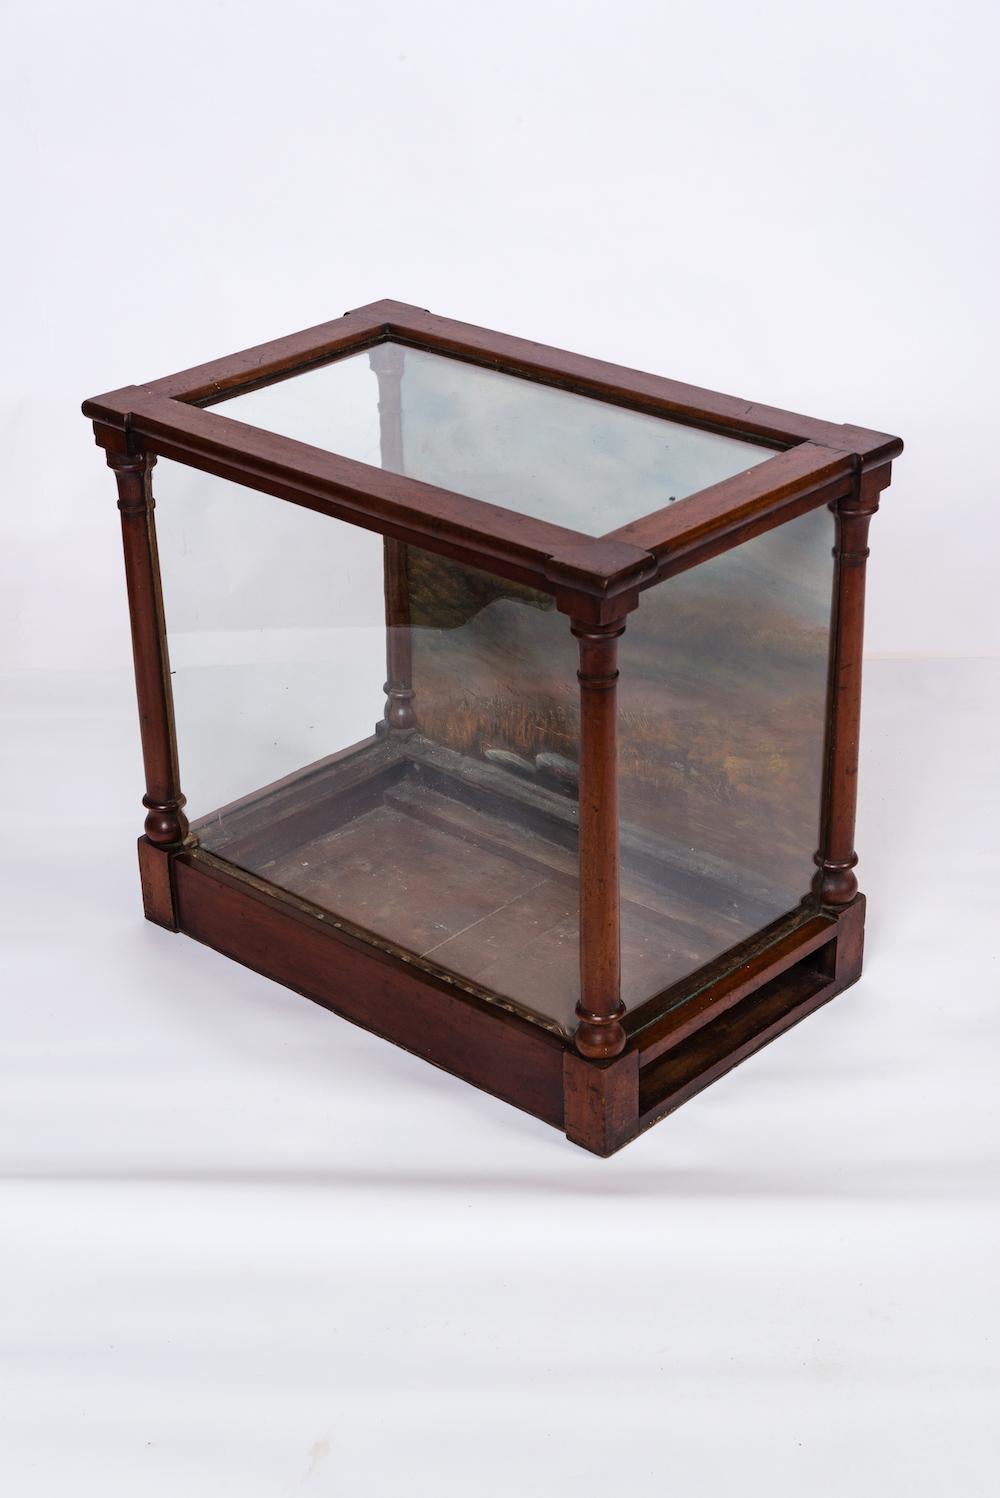  Glass museum display case with a painted landscape back panel.